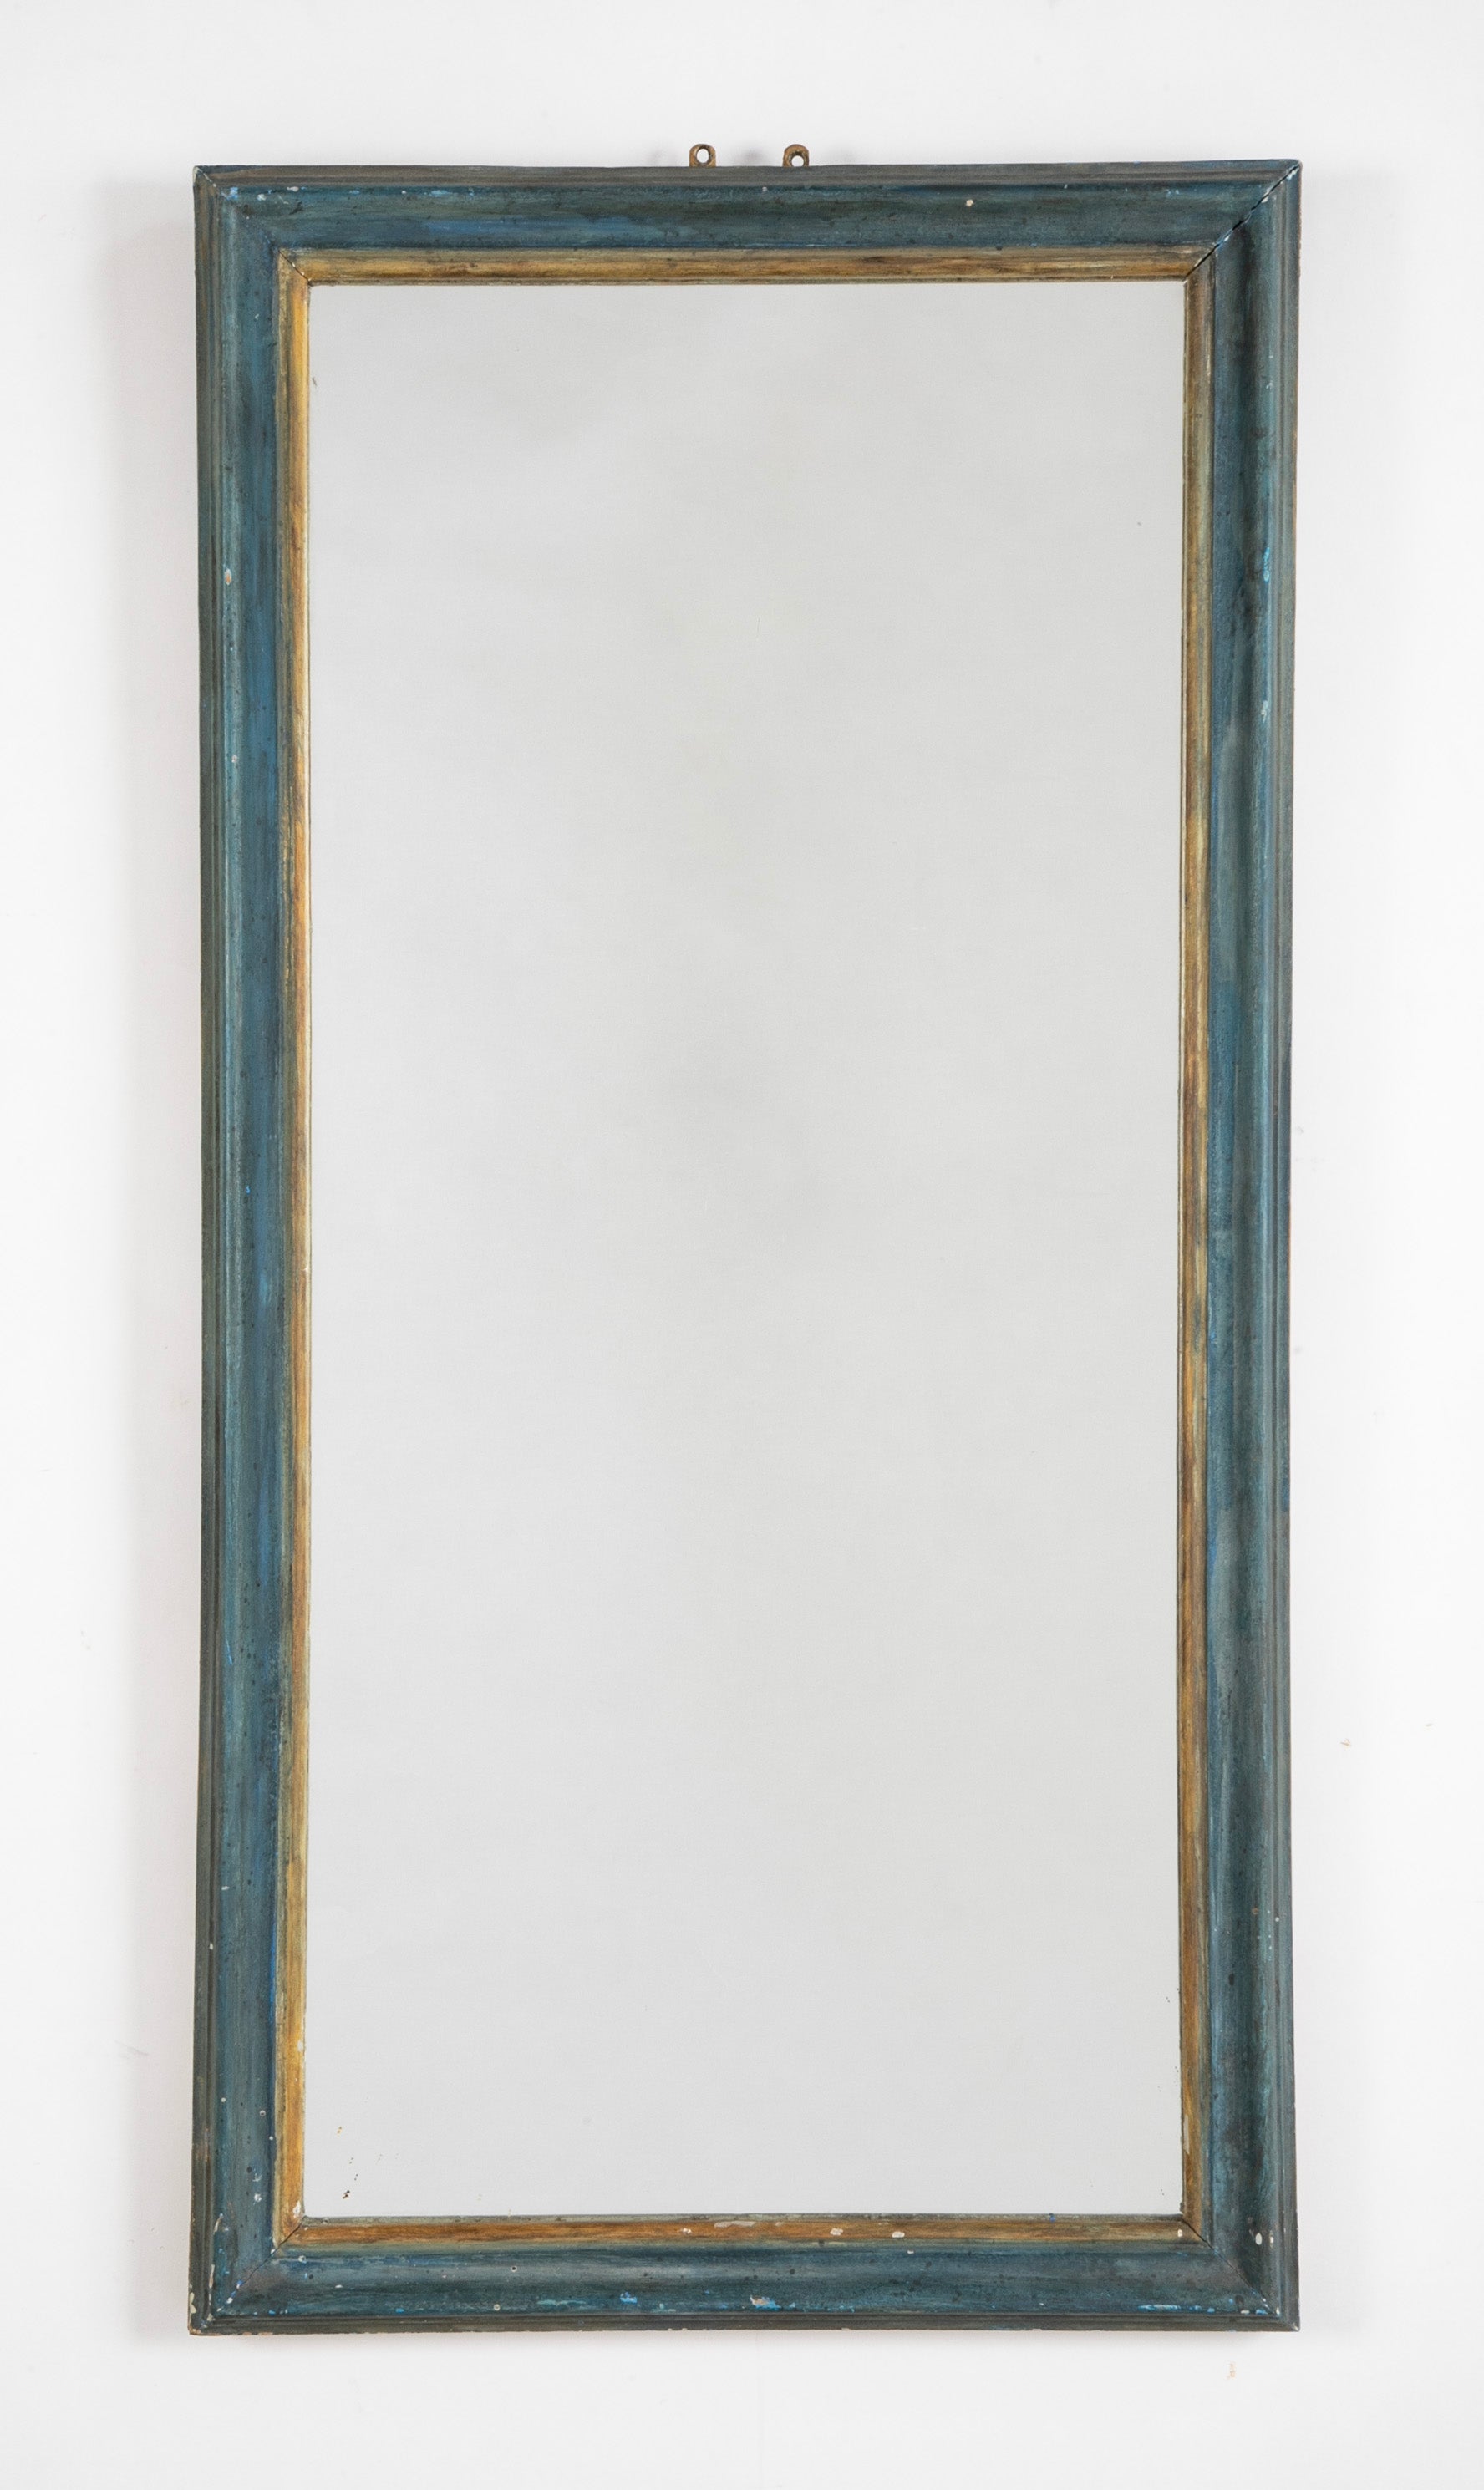 An Early 19th Century French Mirror with Blue Painted & Gilt Frame